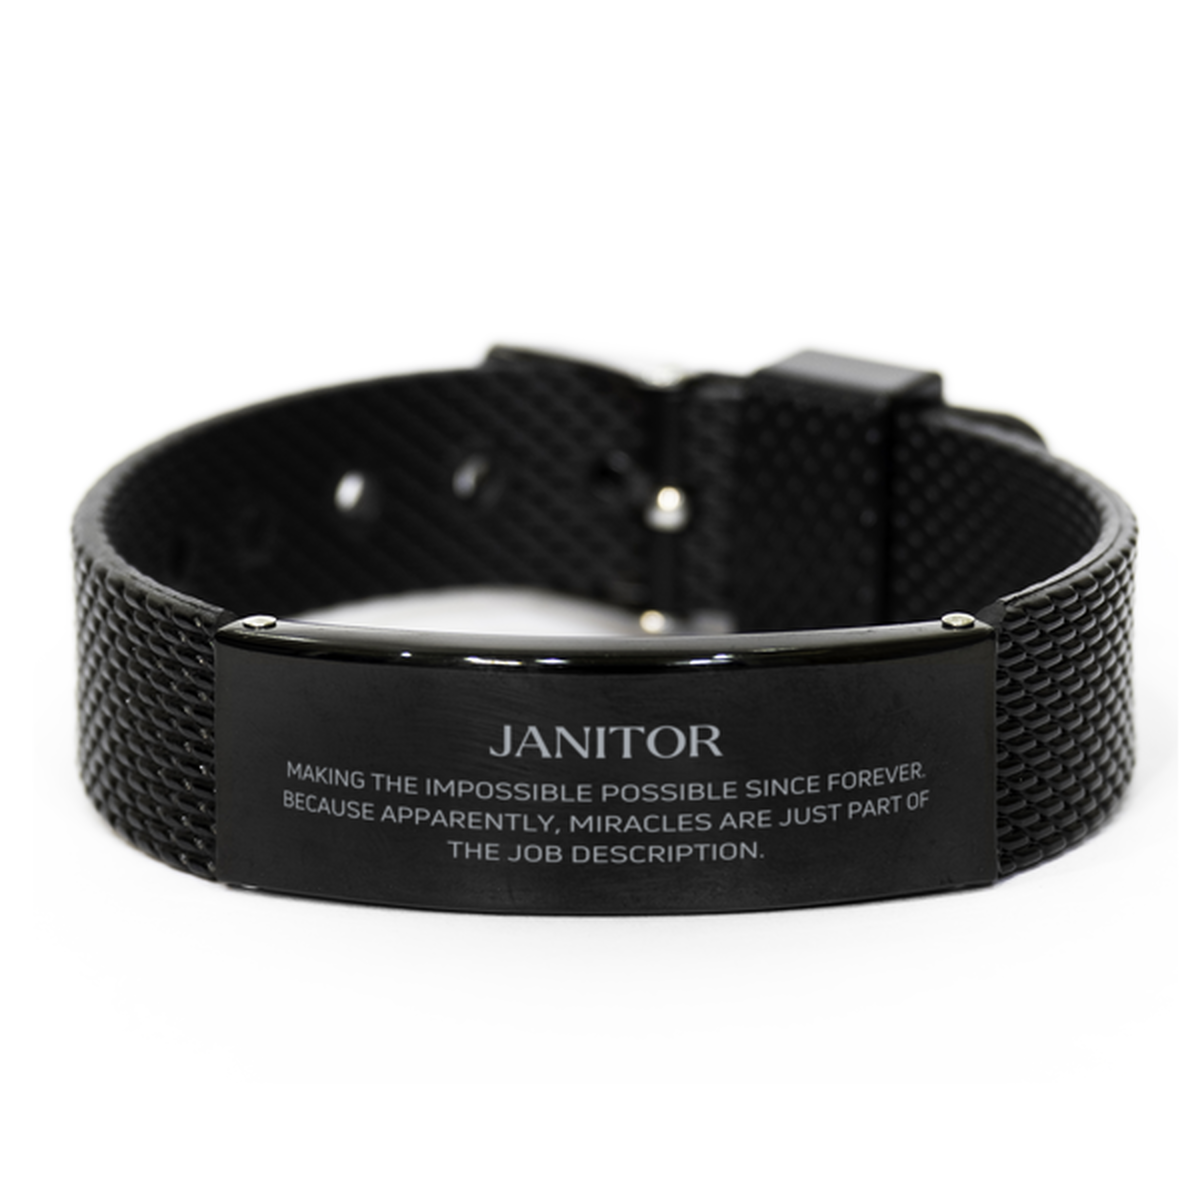 Funny Janitor Gifts, Miracles are just part of the job description, Inspirational Birthday Black Shark Mesh Bracelet For Janitor, Men, Women, Coworkers, Friends, Boss